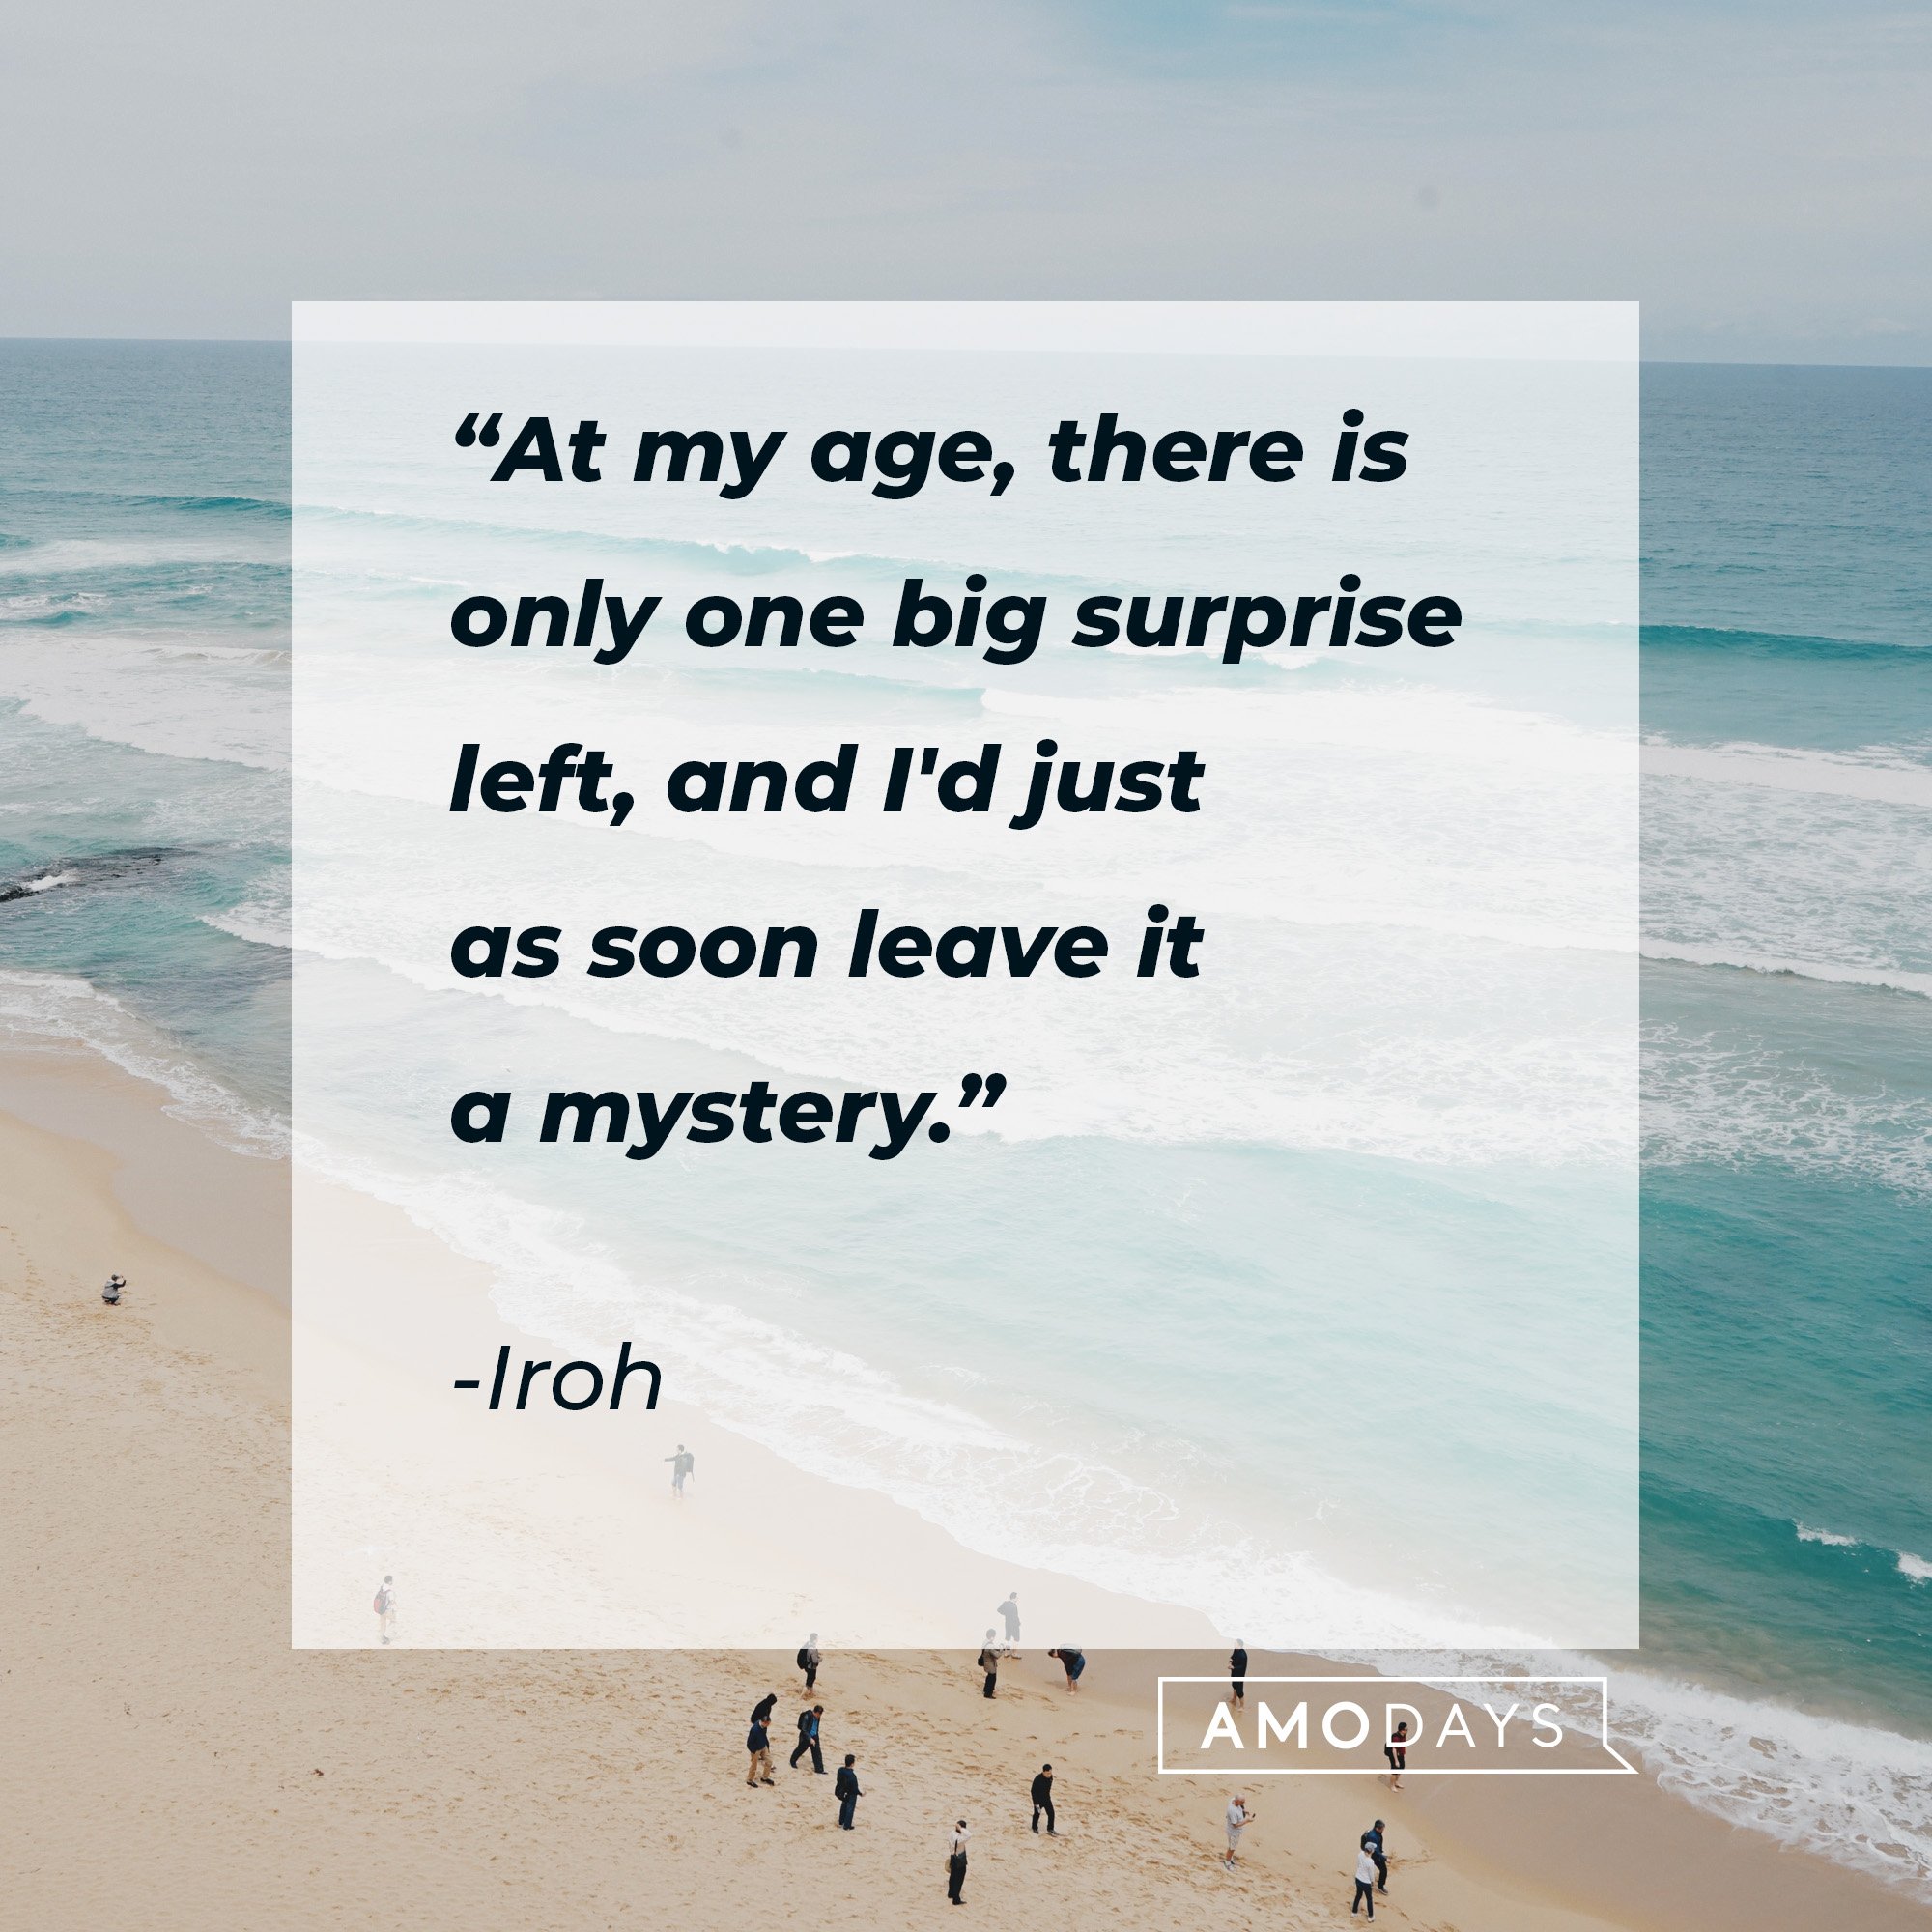 Iroh's quote: “At my age, there is only one big surprise left, and I'd just as soon leave it a mystery.” | Image: AmoDays